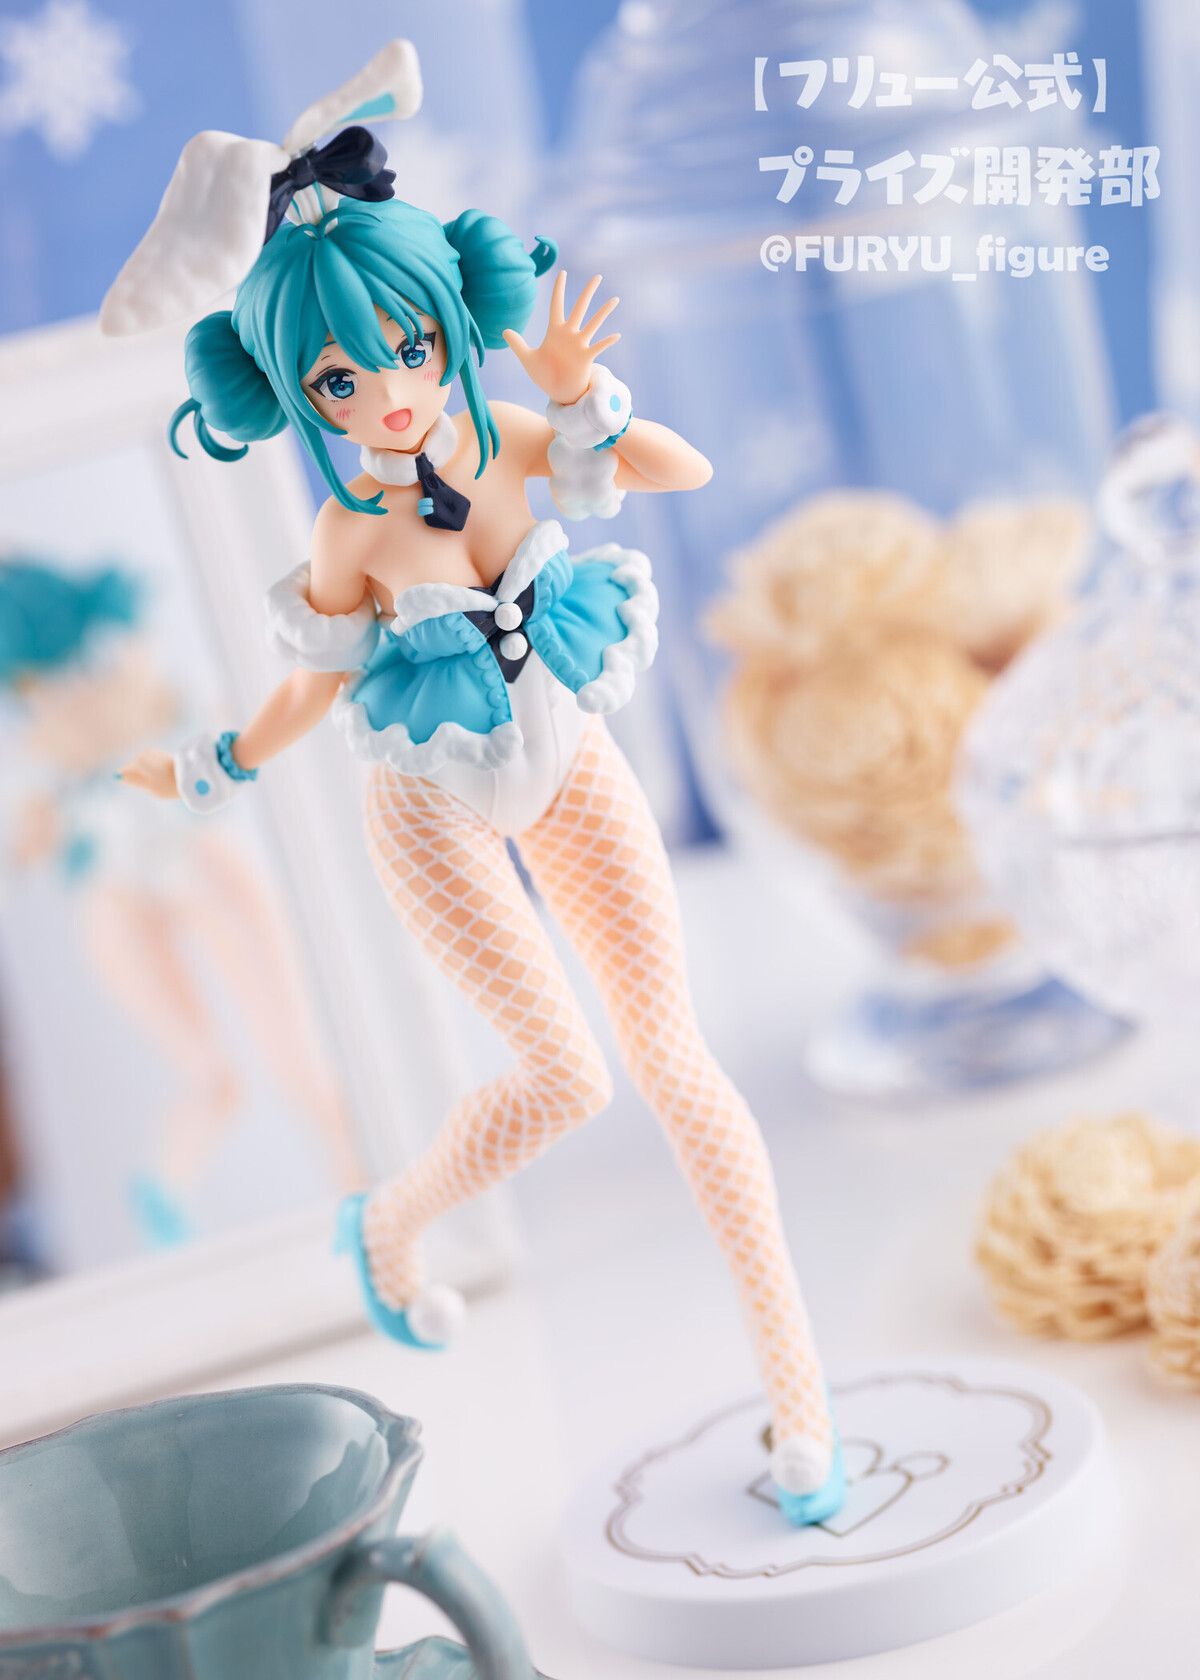 [Hatsune Miku] Erotic figure of the bunny figure of the and thighs of the muchimuchi drawn by Anmi teacher! 5